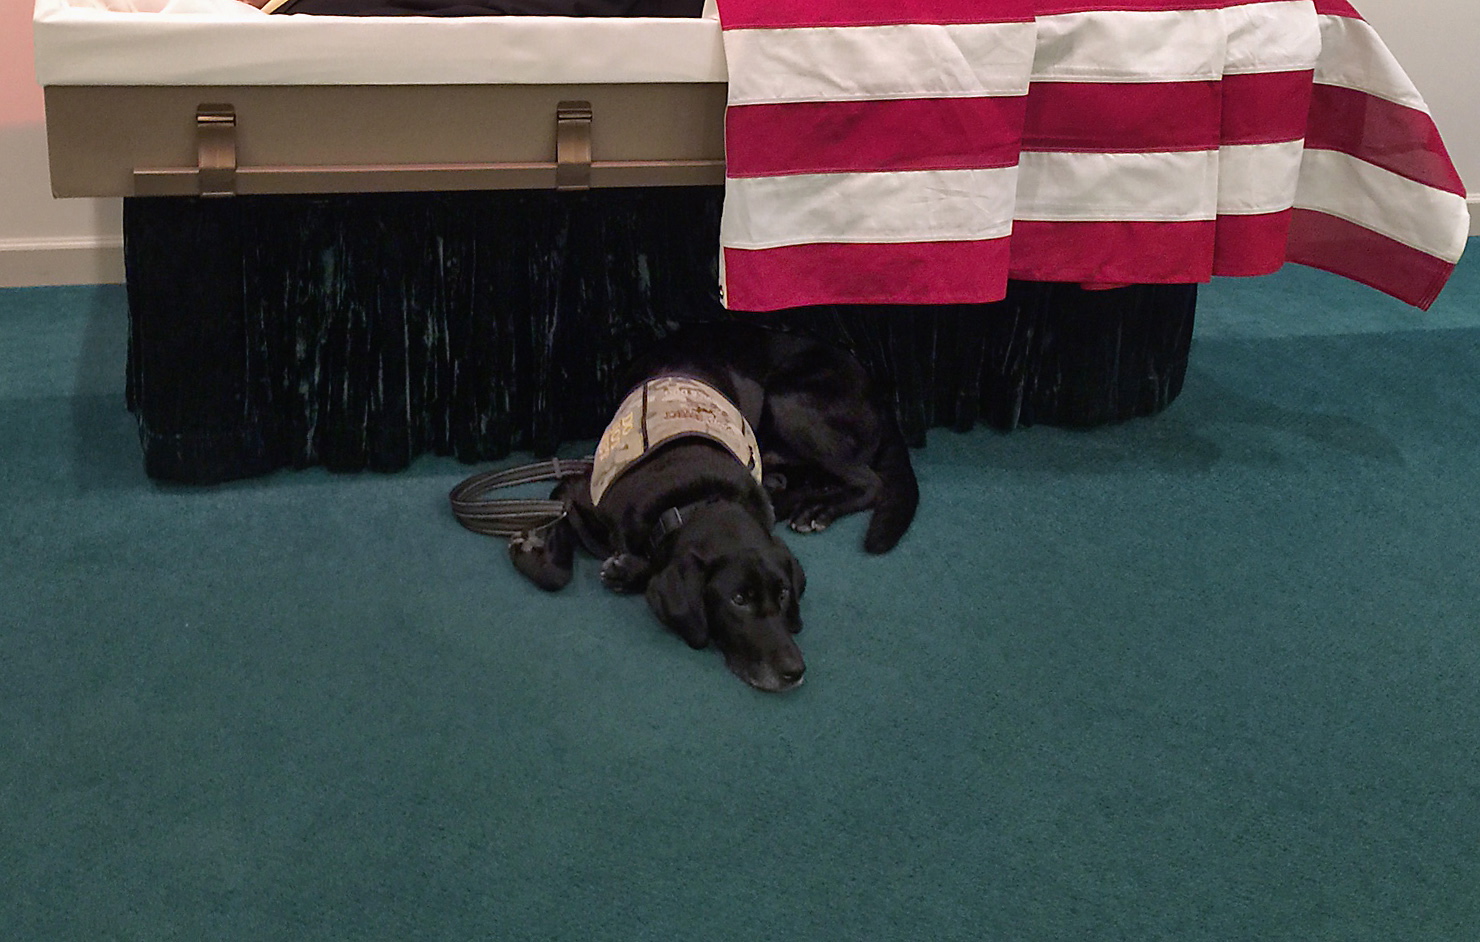 PTSD service dog Honor lies by the casket of Wade Baker at the Wells Funeral Home in Waynesville, N.C. When he saw his master lying in the flag-draped casket, the Labrador pushed through the clutch of weeping family members, reared up, placed his paws on the edge and tried to climb in. Unable to comfort Baker, he curled up underneath.